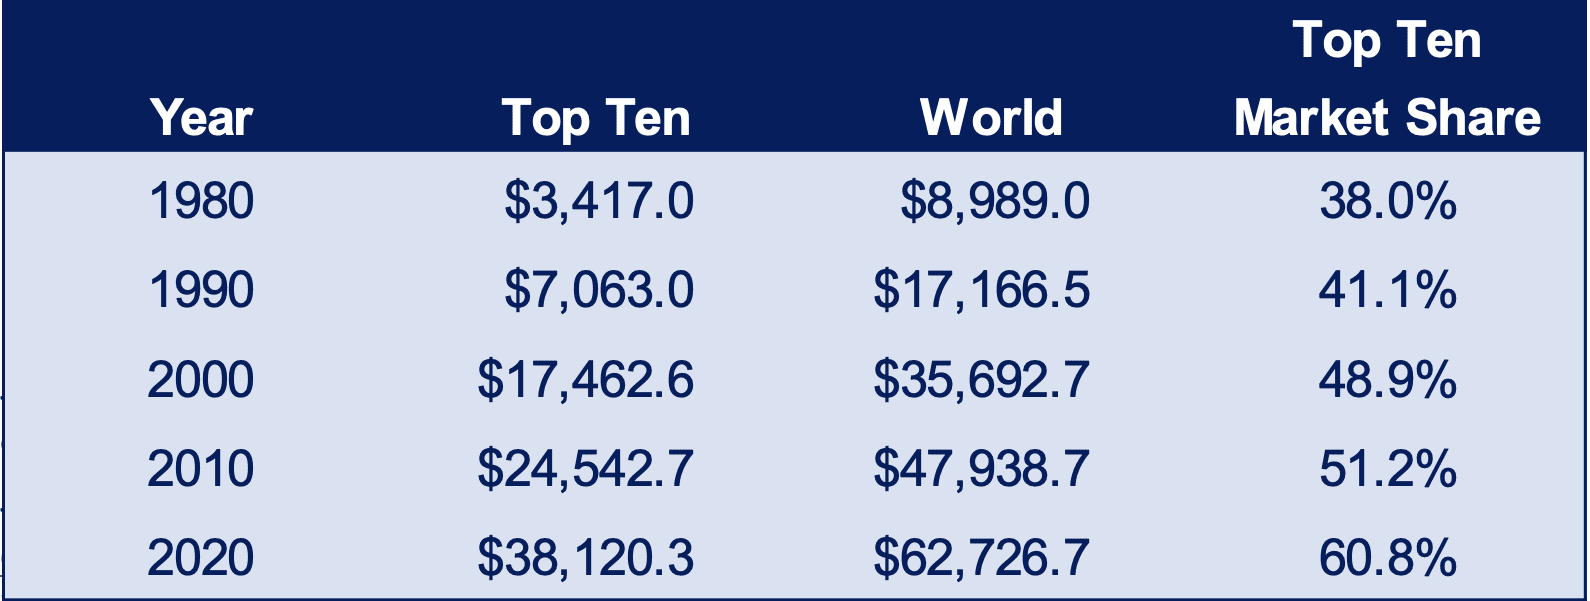 Top 10 Share of Market